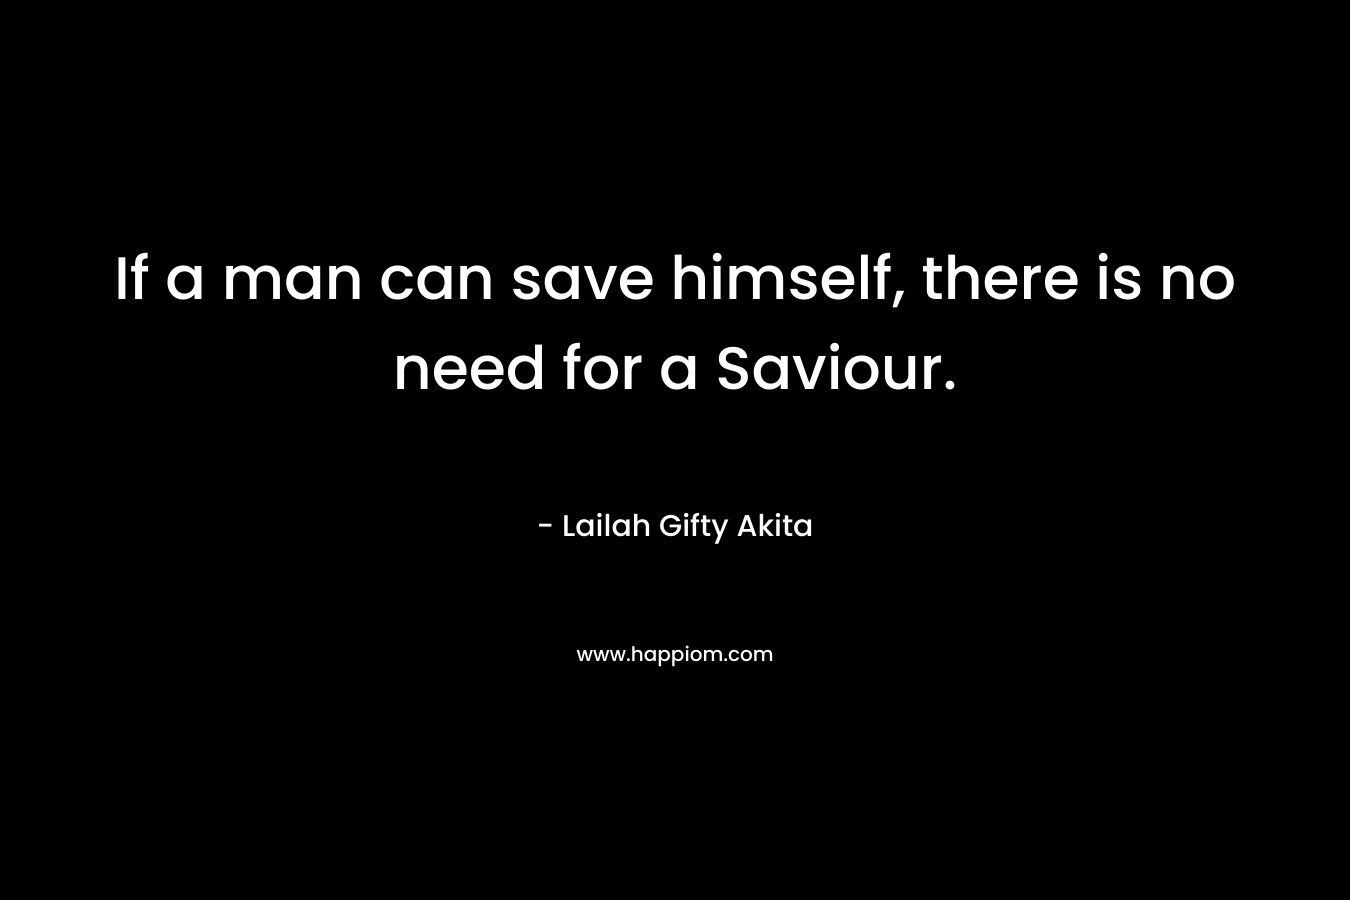 If a man can save himself, there is no need for a Saviour.